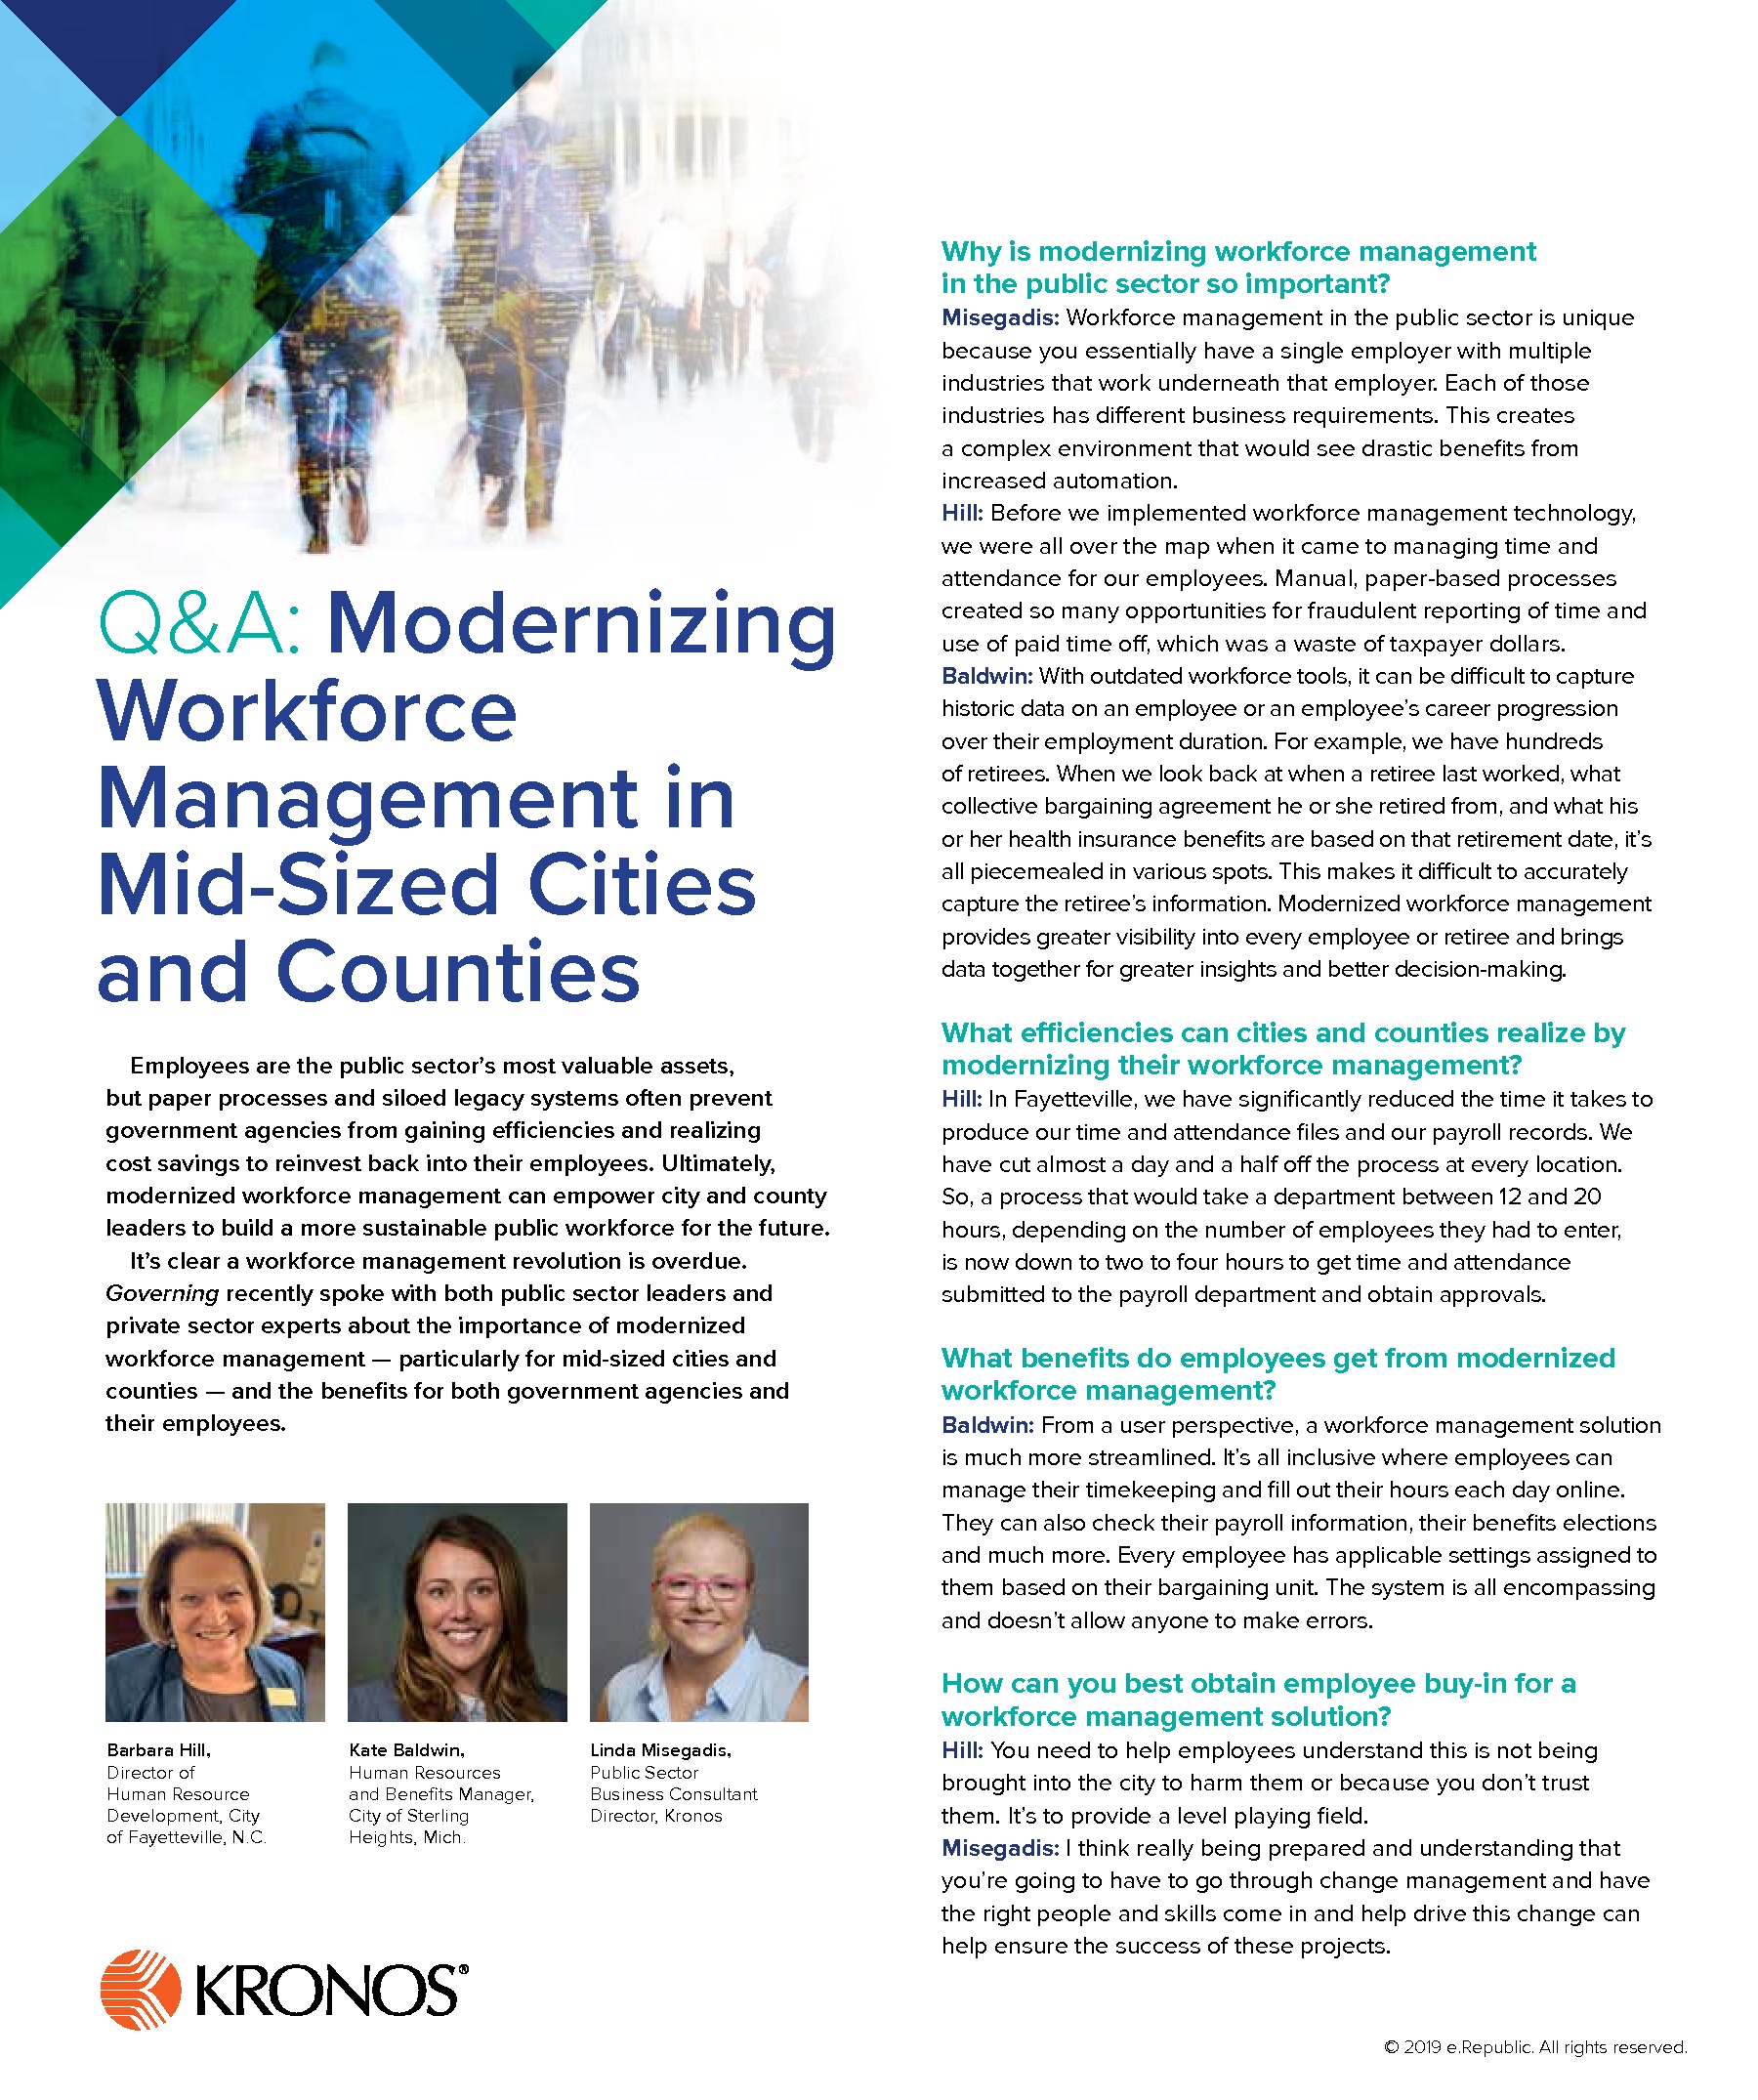 Q&A: Modernizing Workforce Management in Mid-Sized Cities and Counties